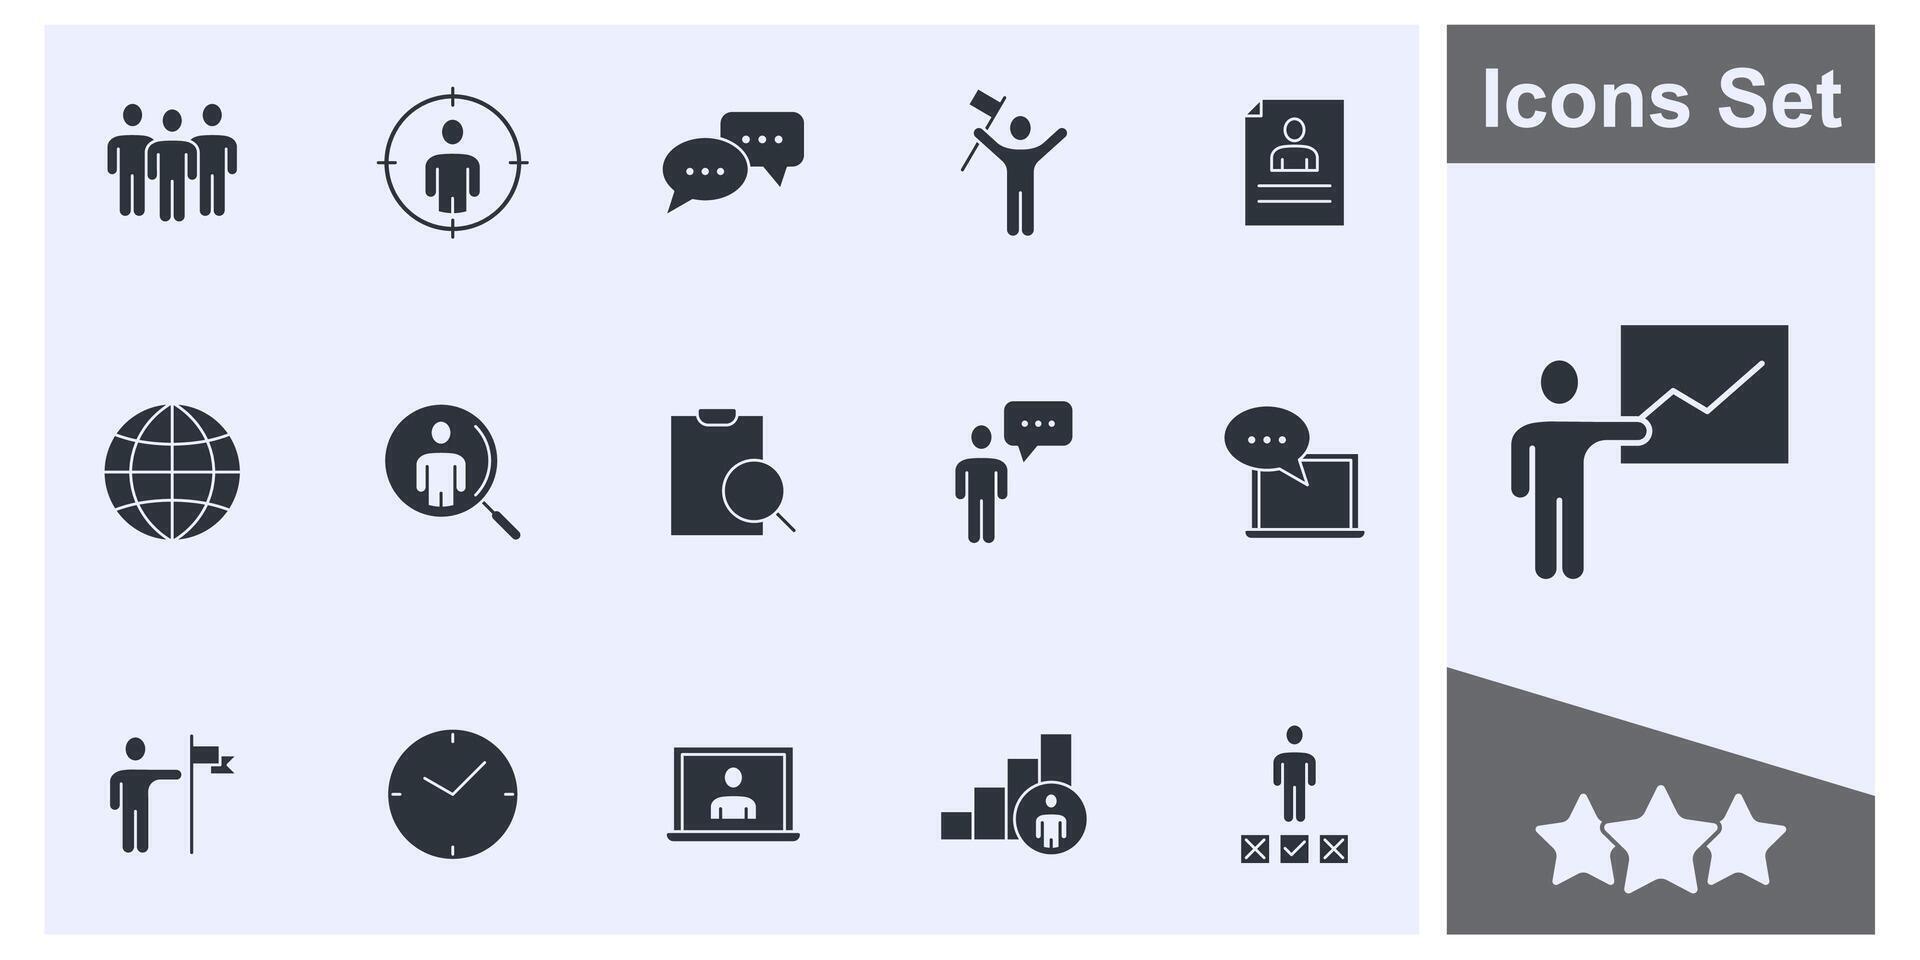 Business people icon set symbol collection, logo isolated illustration vector